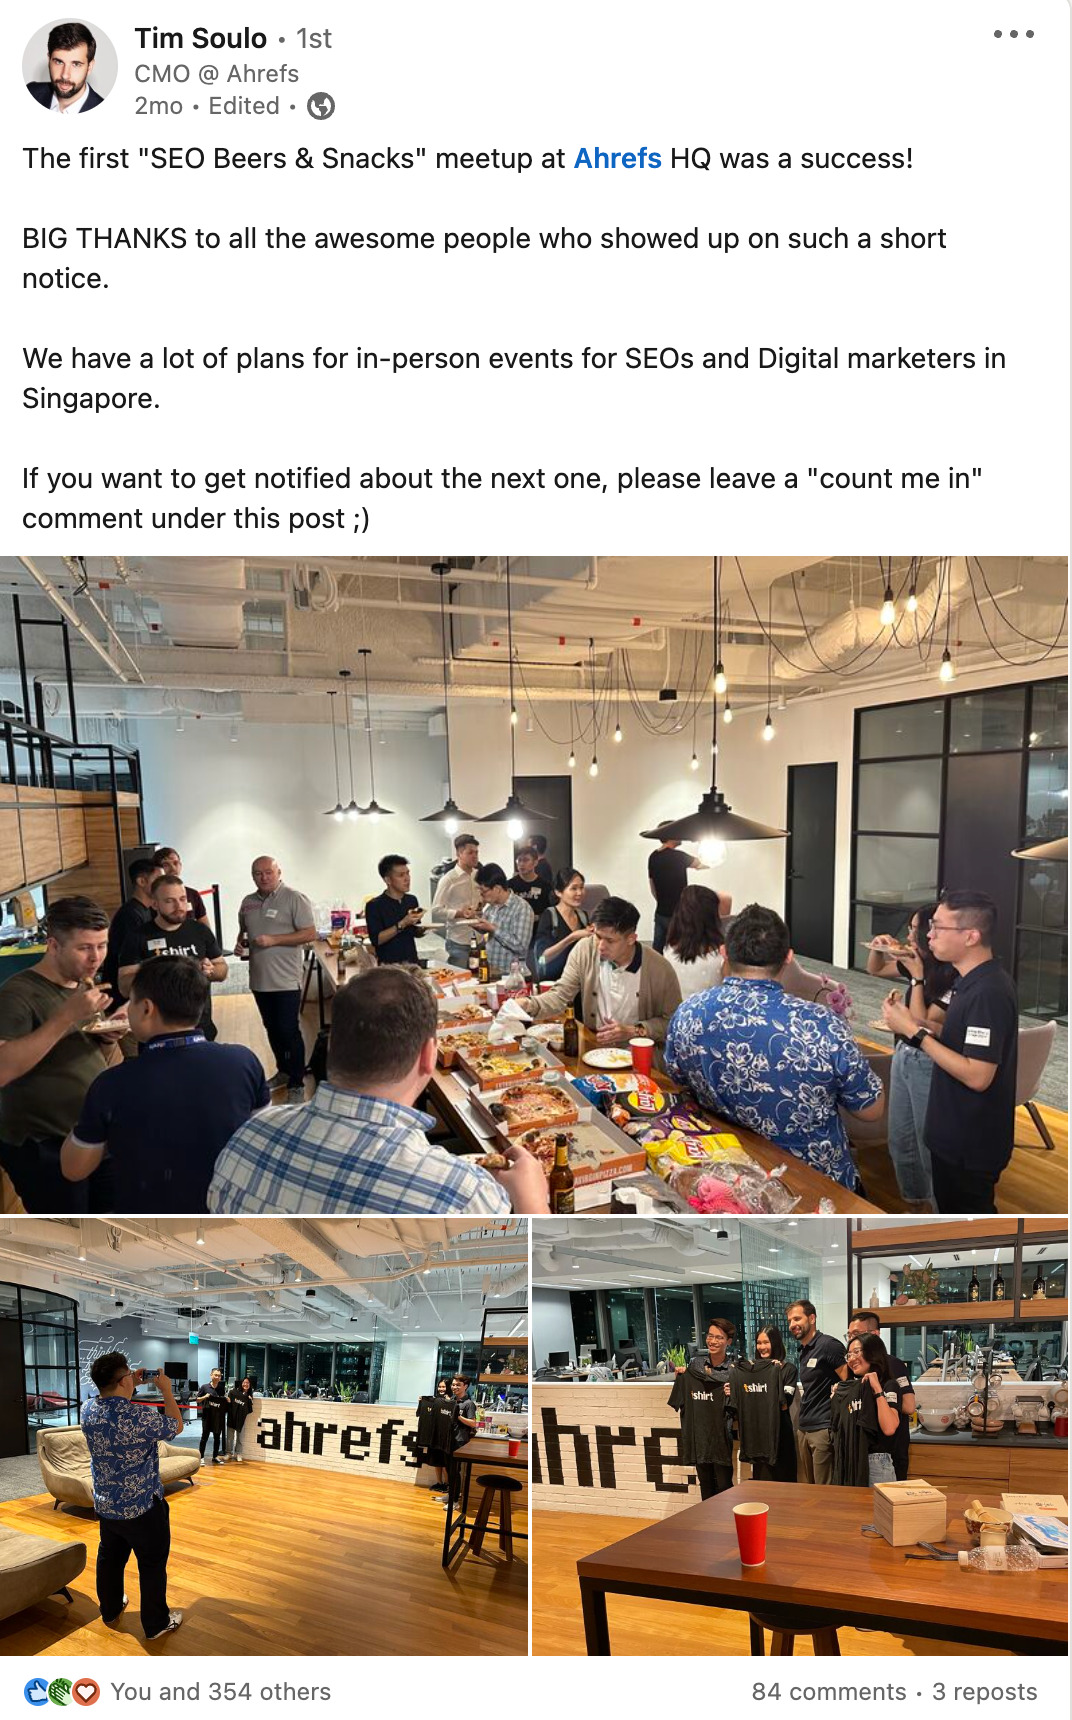 Tim's Linkedin post on Ahrefs' beer and snacks event